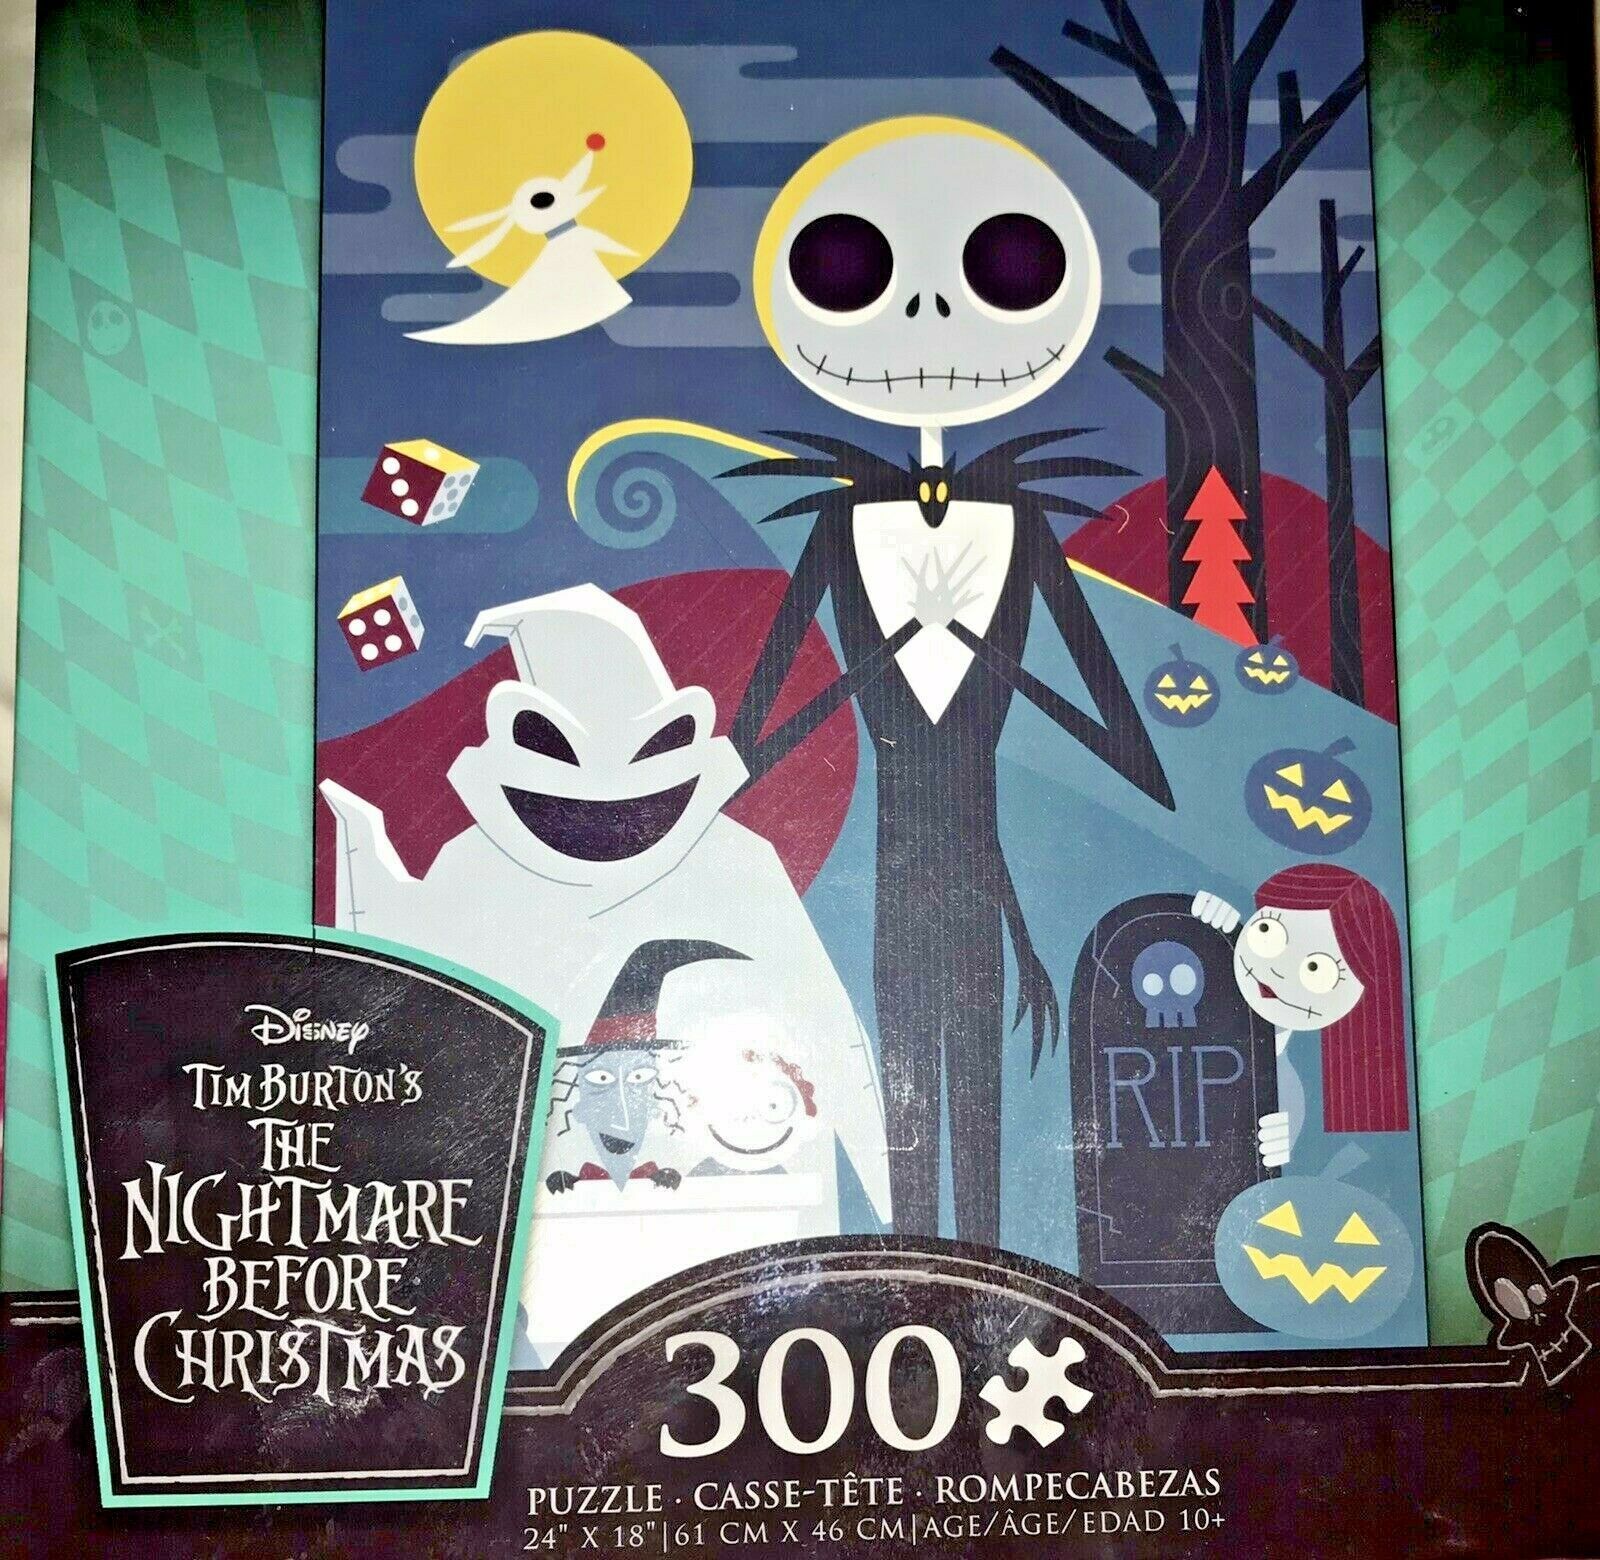 Ceaco Disney Nightmare Before Christmas Poster 550 Piece 18 x 24 Jigsaw Puzzle 